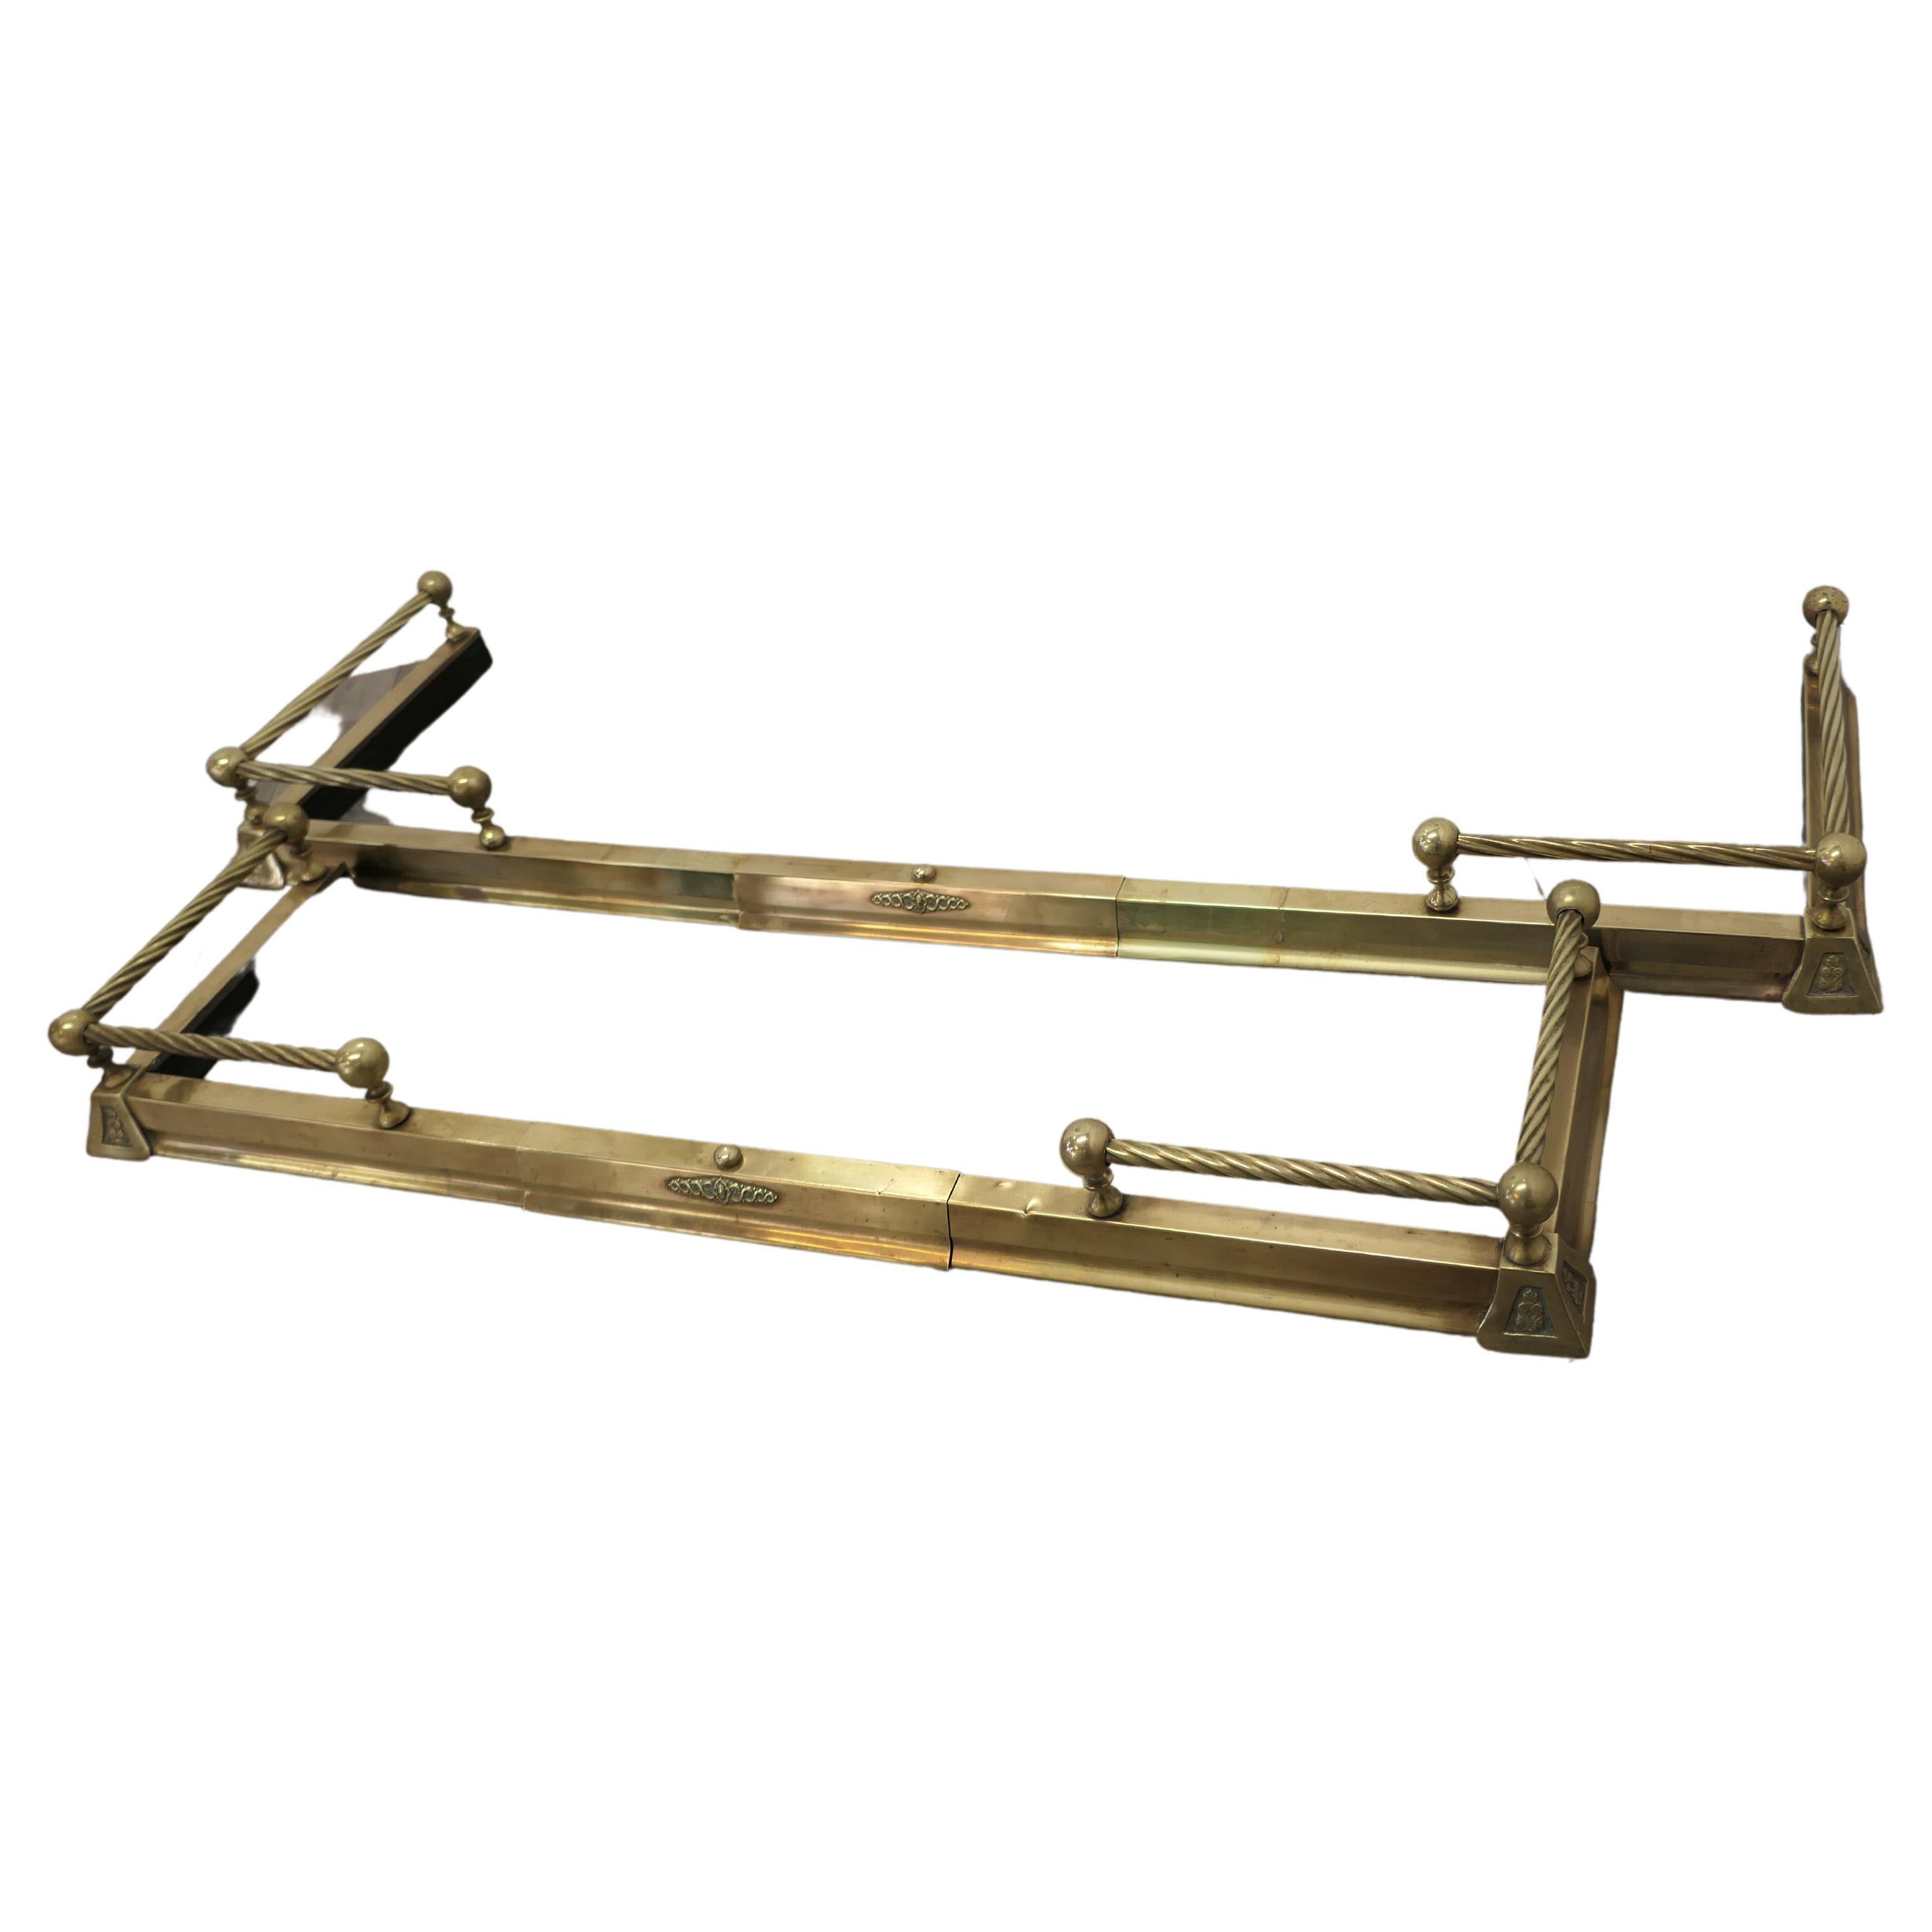 A Pair of Victorian Extending Barley twist brass fenders

This is a very attractive Pair of Brass Fenders they have a brass base with a barley twist brass rail above and small decoration to the corners of the base

The Fenders are both in good